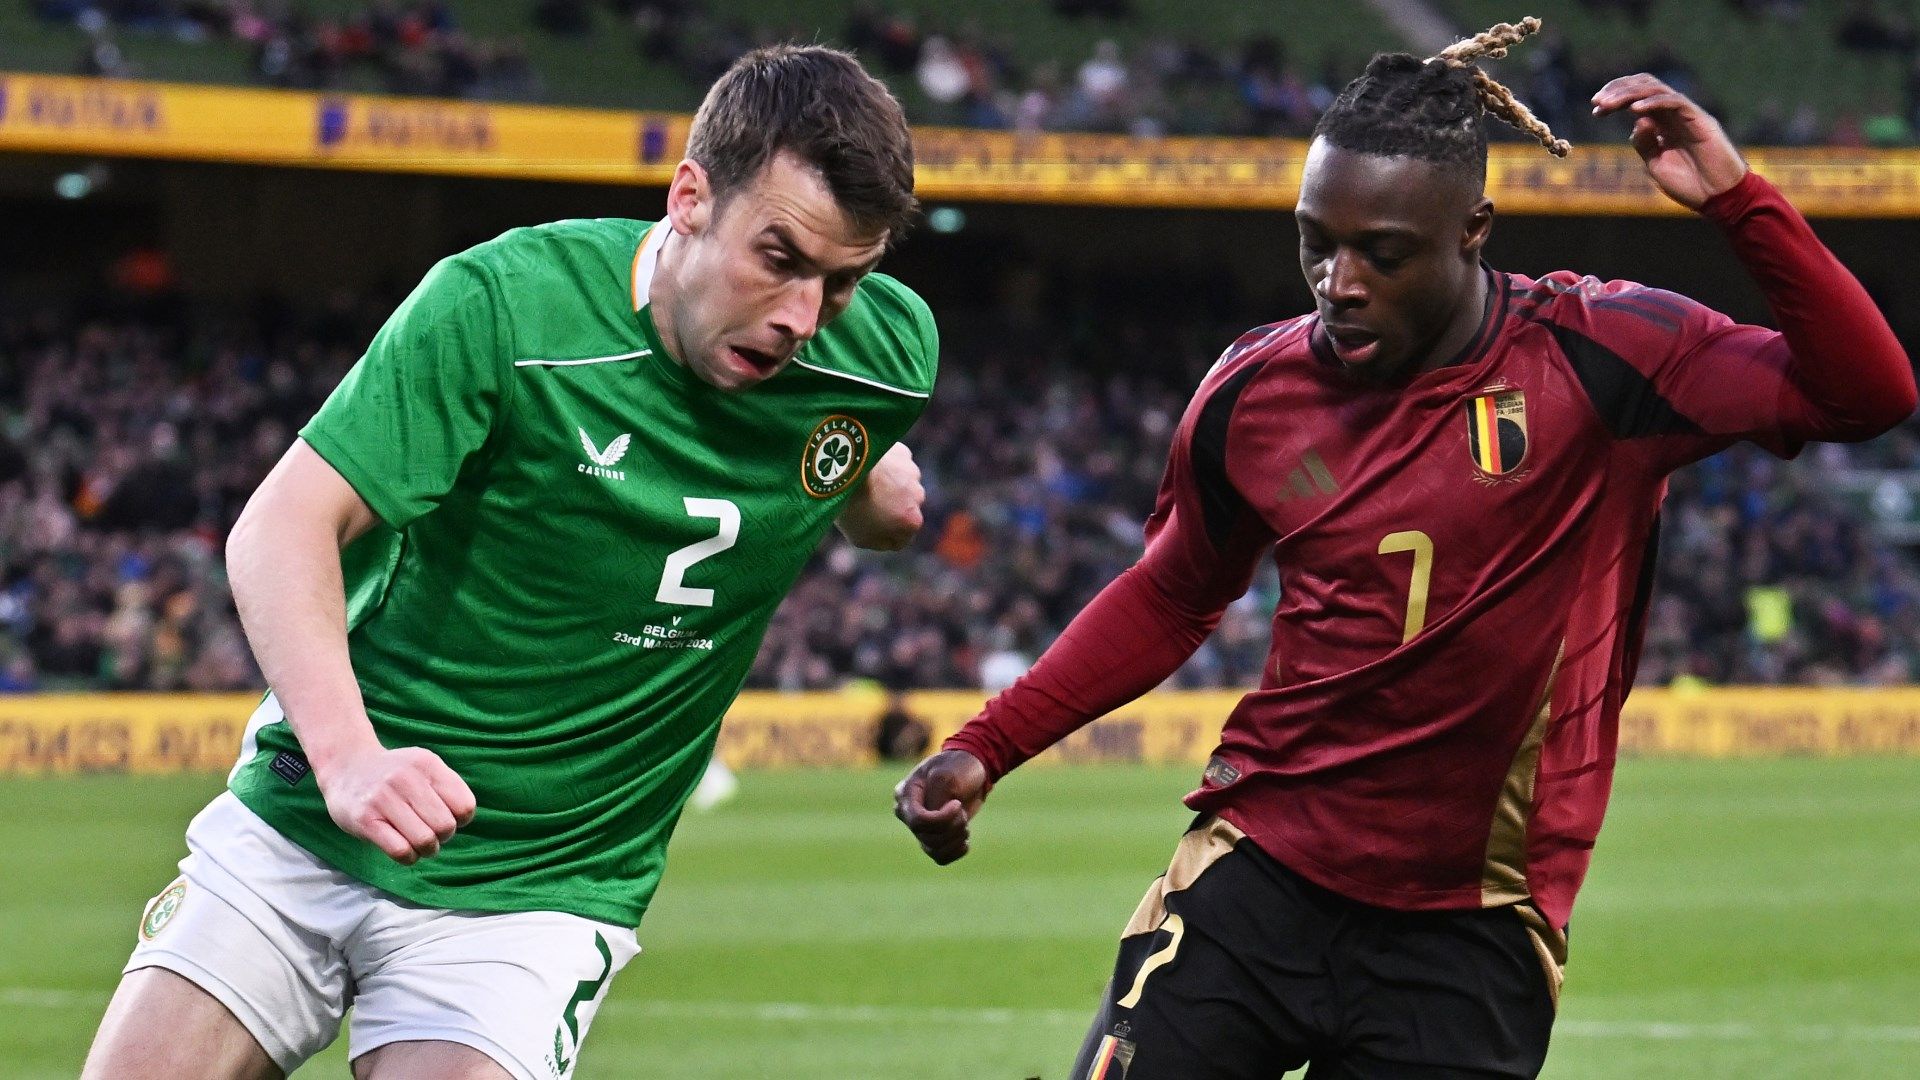 Ireland vs Switzerland: Where to watch the match online, live stream, TV channels, and kick-off time | Goal.com UK